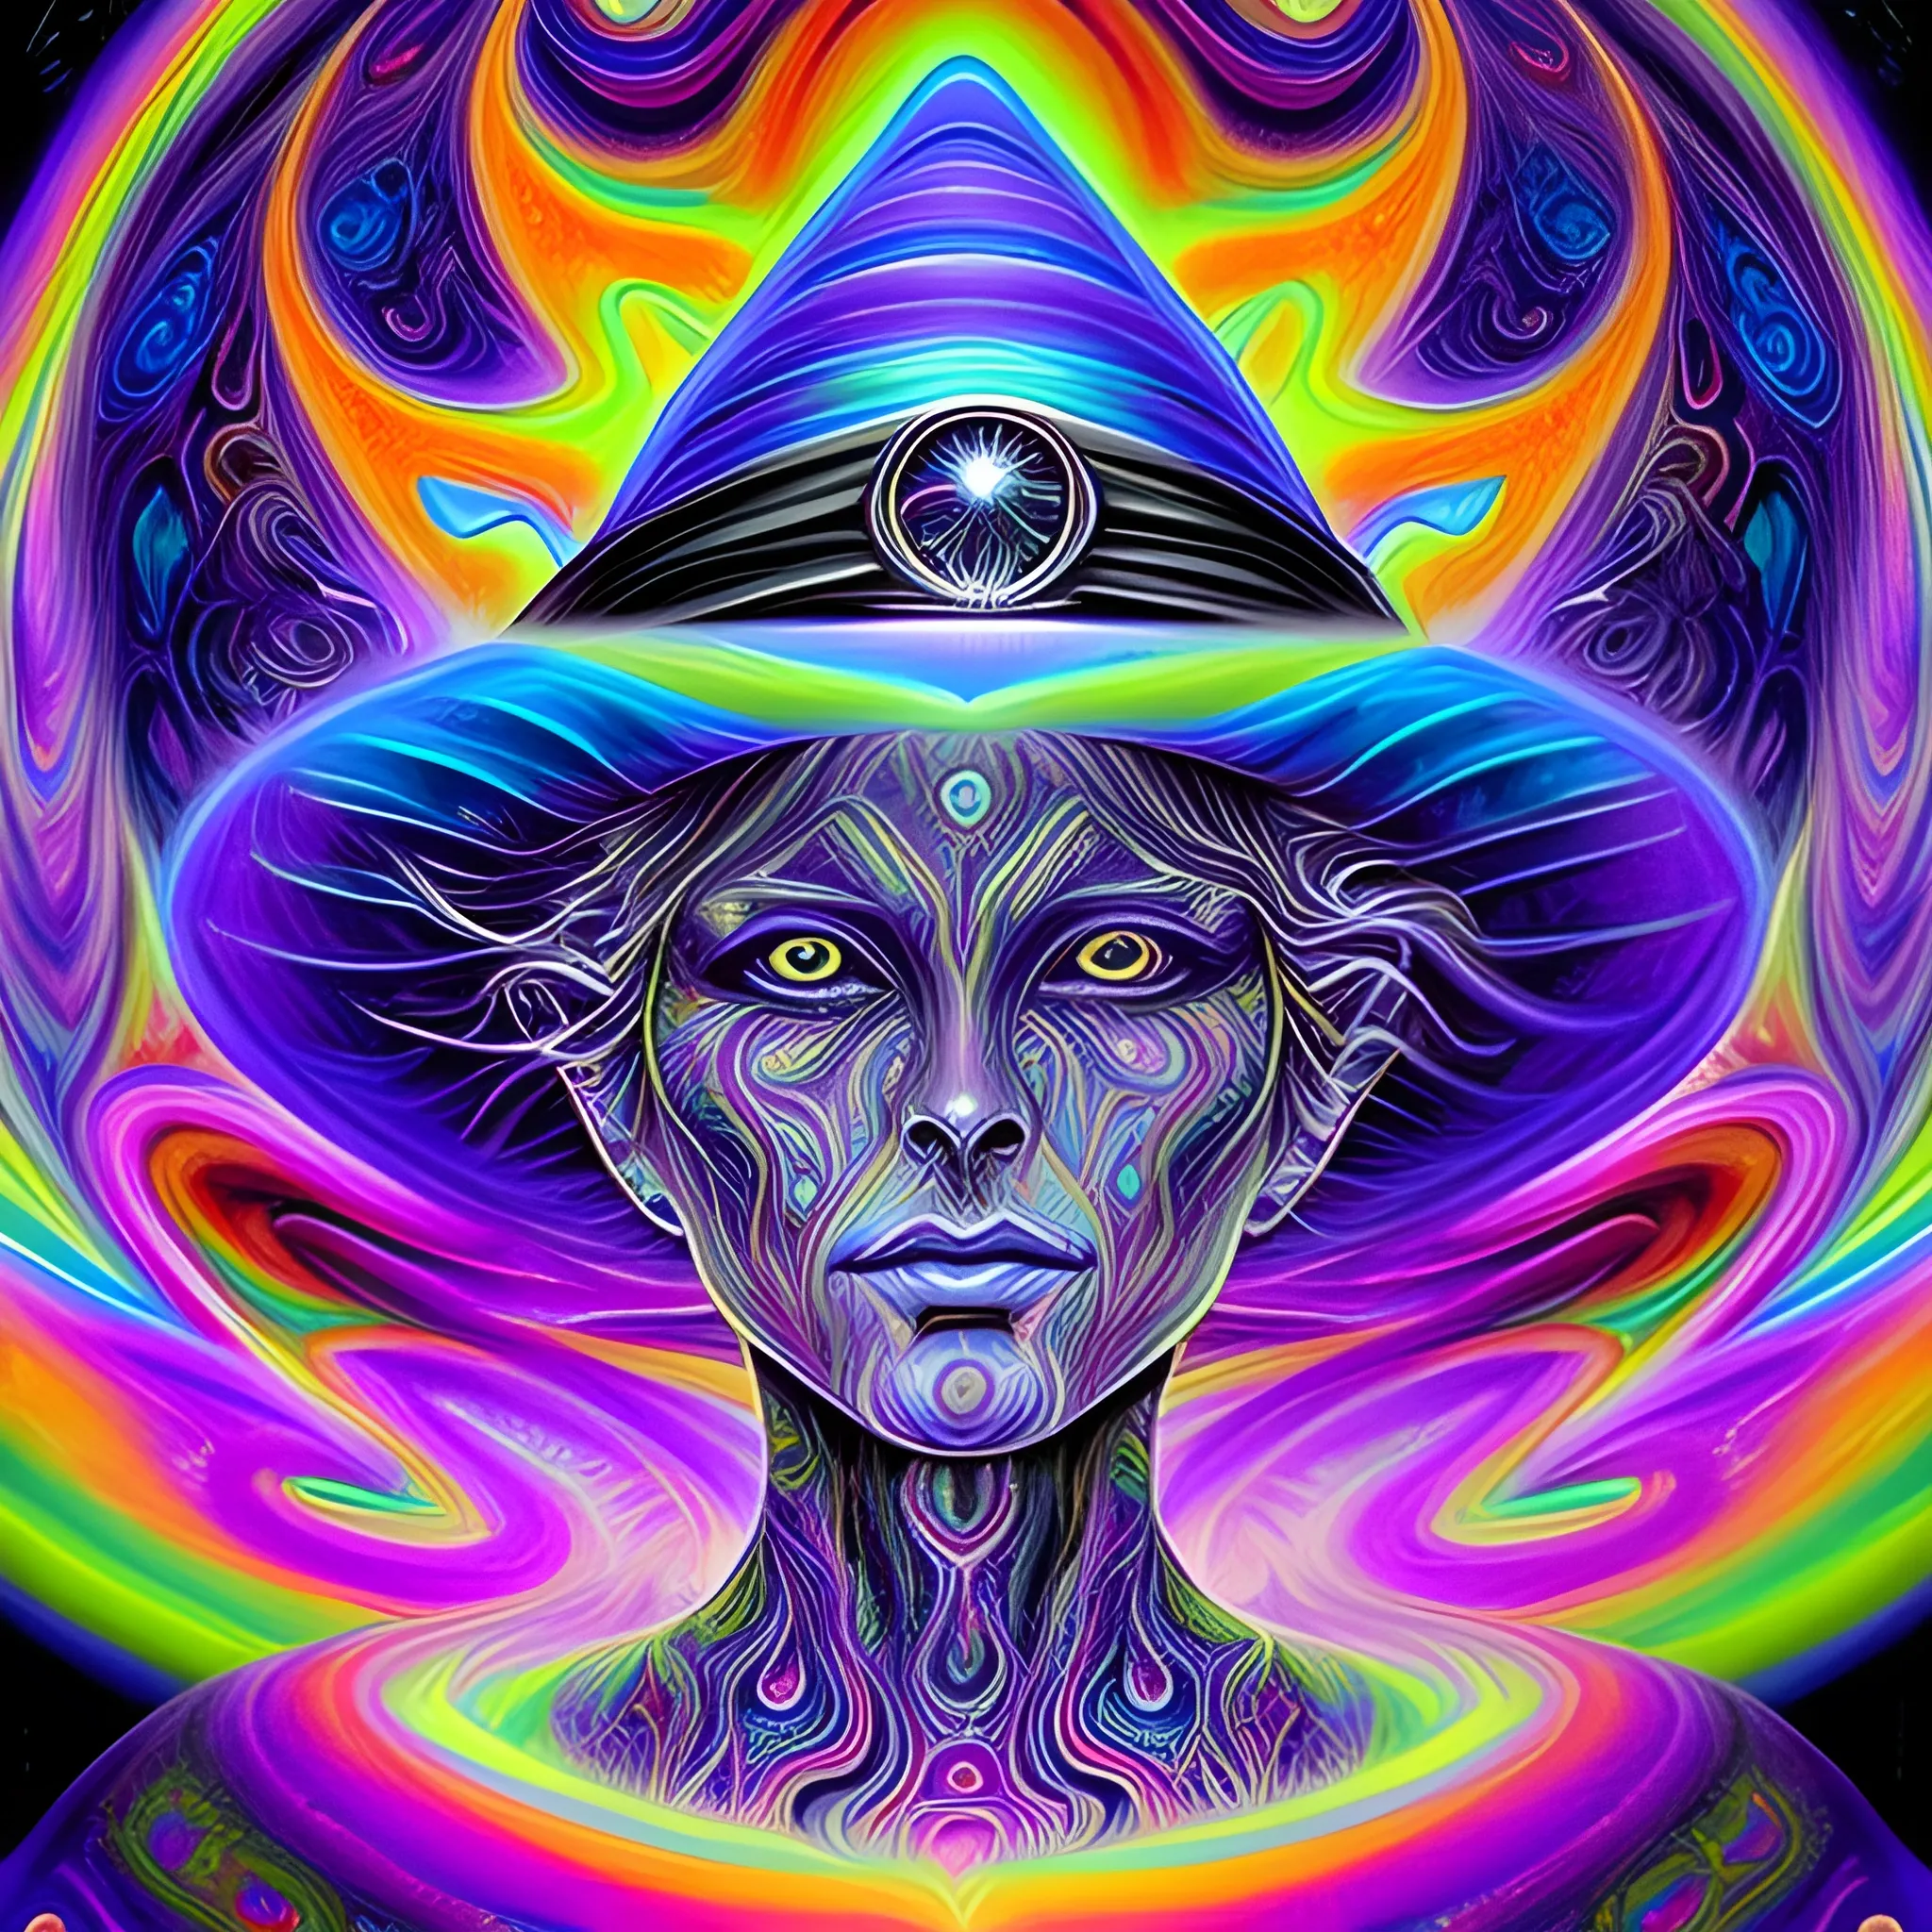 mysterious witch, incredible ultra dimensional psychedelic experience time, while tripping on dmt, energy waves, trippy melting eyes, overwhelming psychosis of self - realization and burning awakening, masterpiece composition, by barclay shaw, louis dyer, pablo amaringo , Pencil Sketch